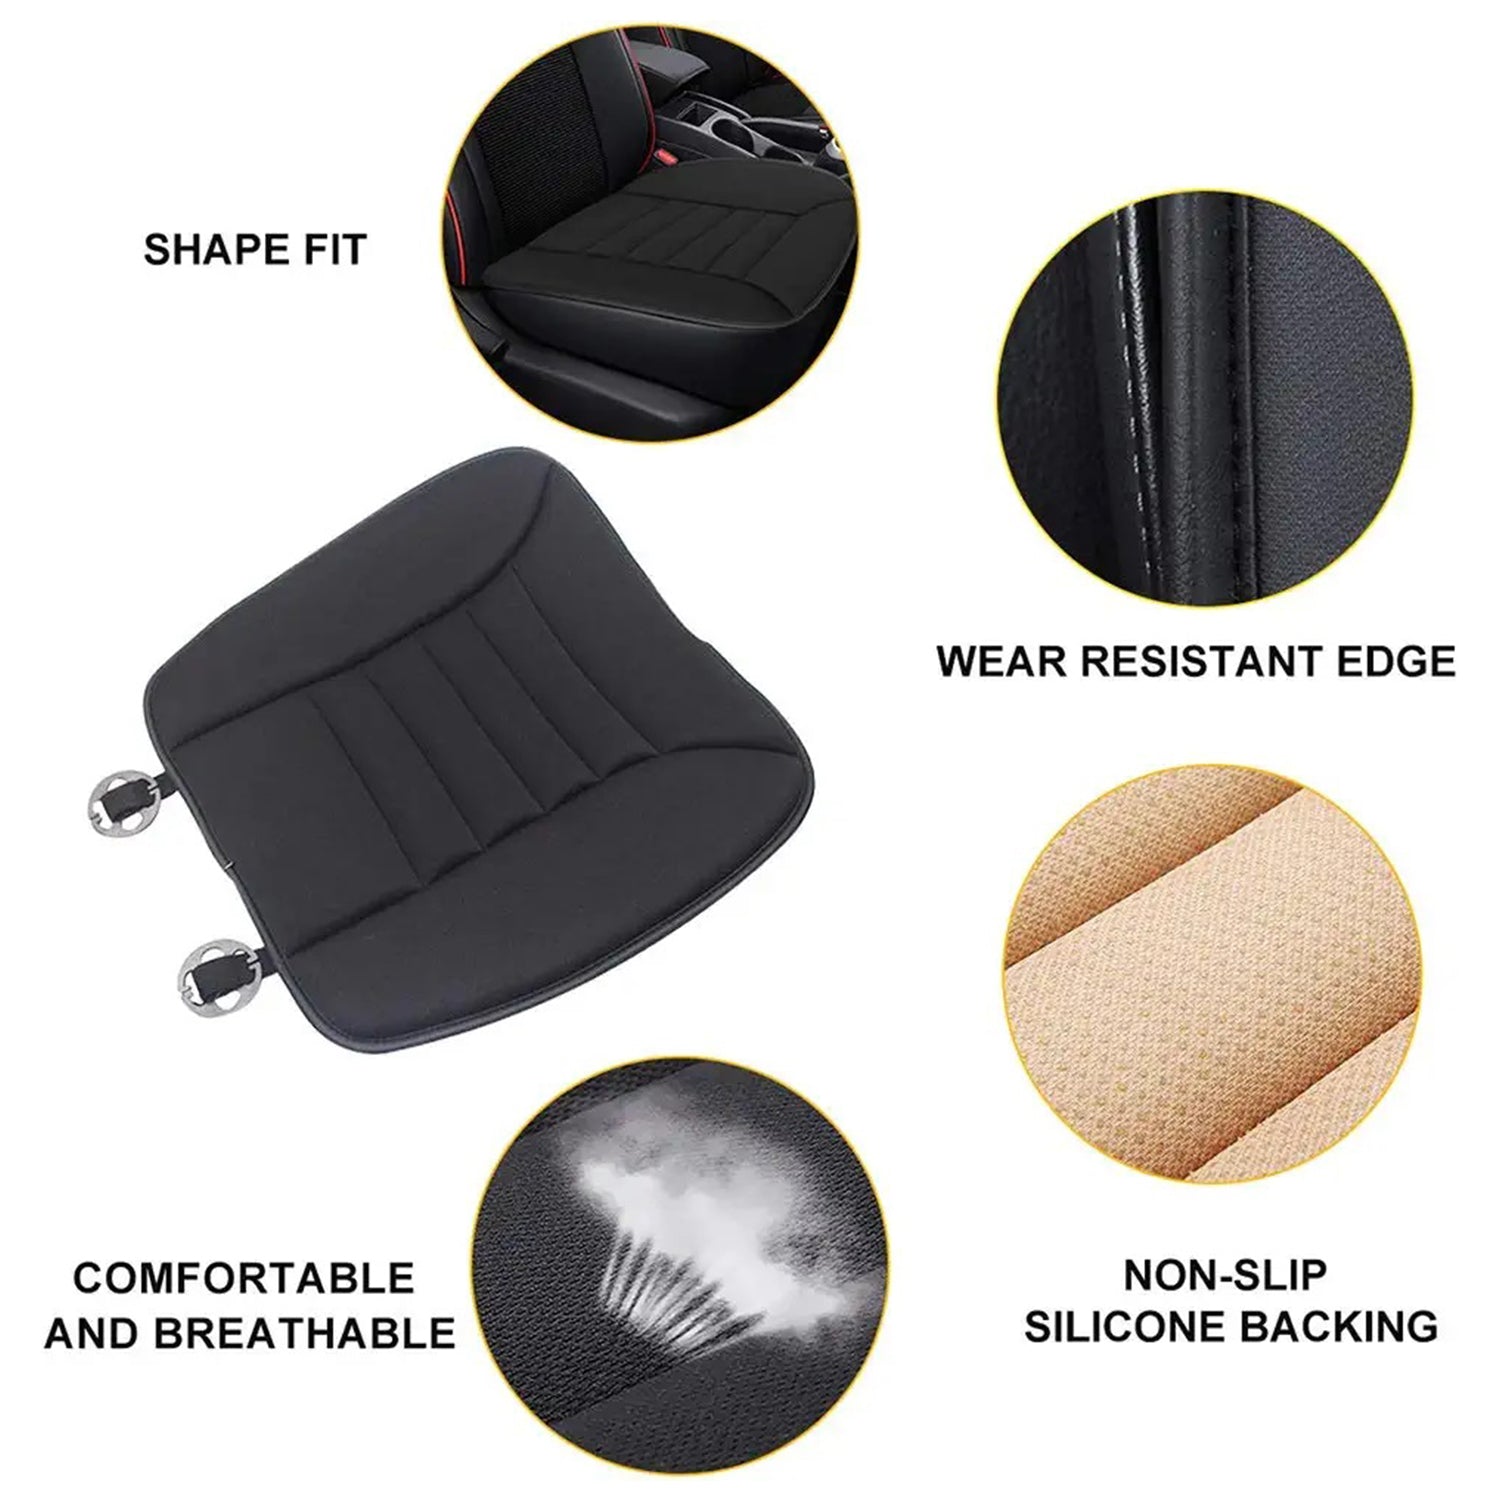 Car Seat Cushion with 1.2inch Comfort Memory Foam, Custom-Fit For Car, Seat Cushion for Car and Office Chair DLFJ247